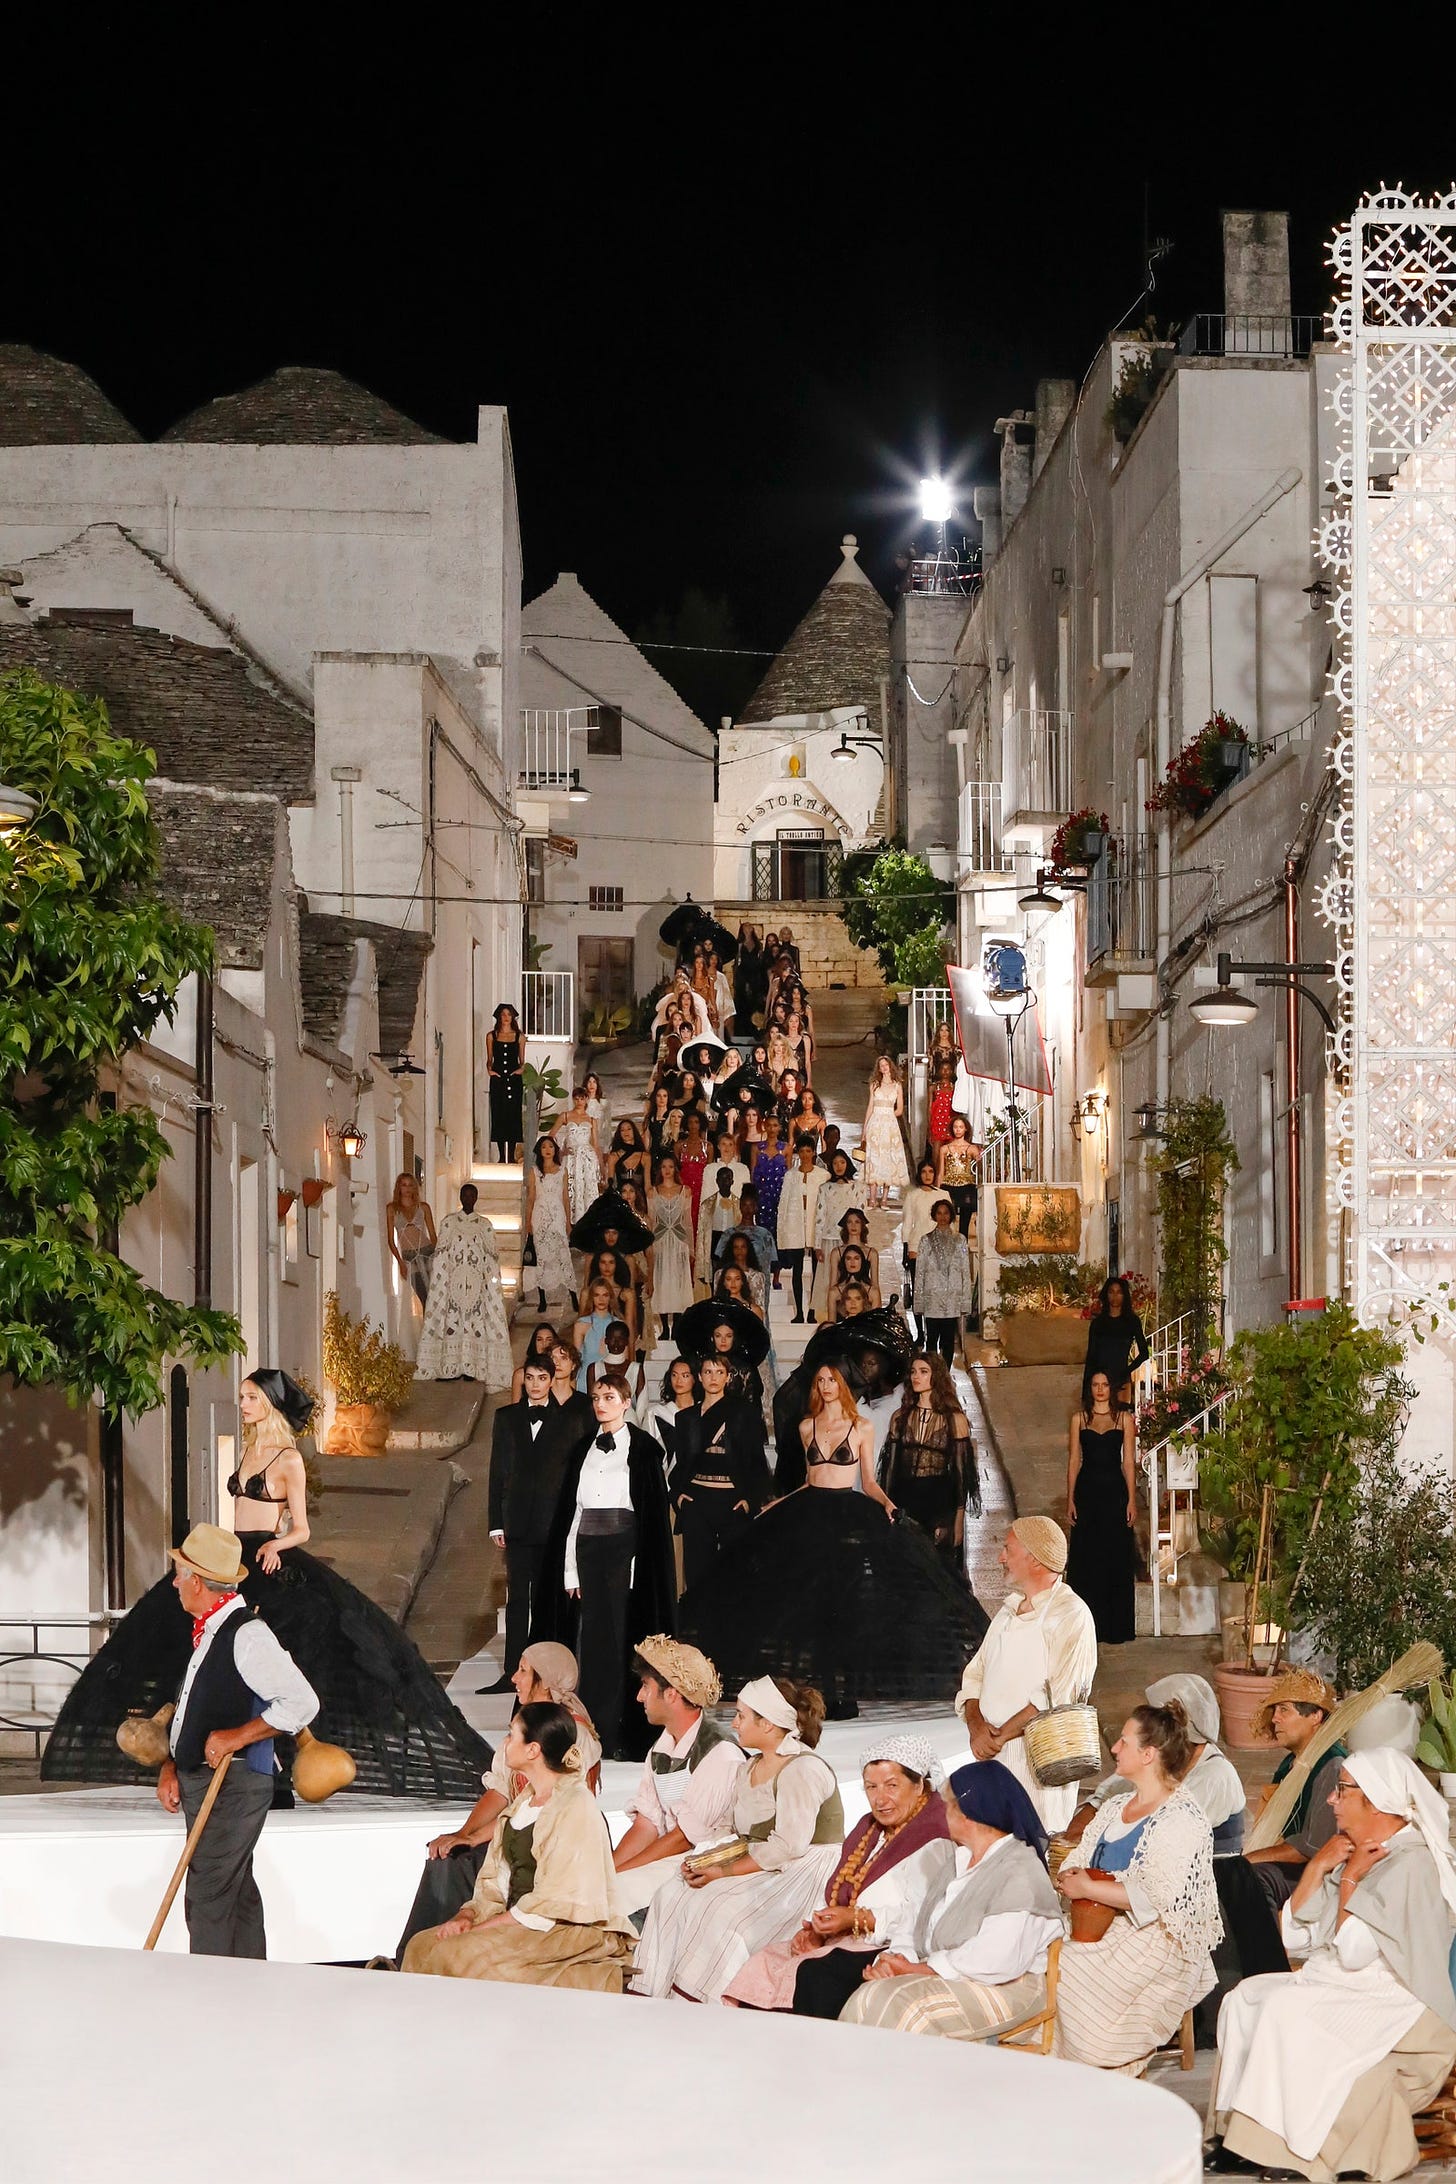 Models arrayed on a hilly street of Alberobello with local craftspeople looking on